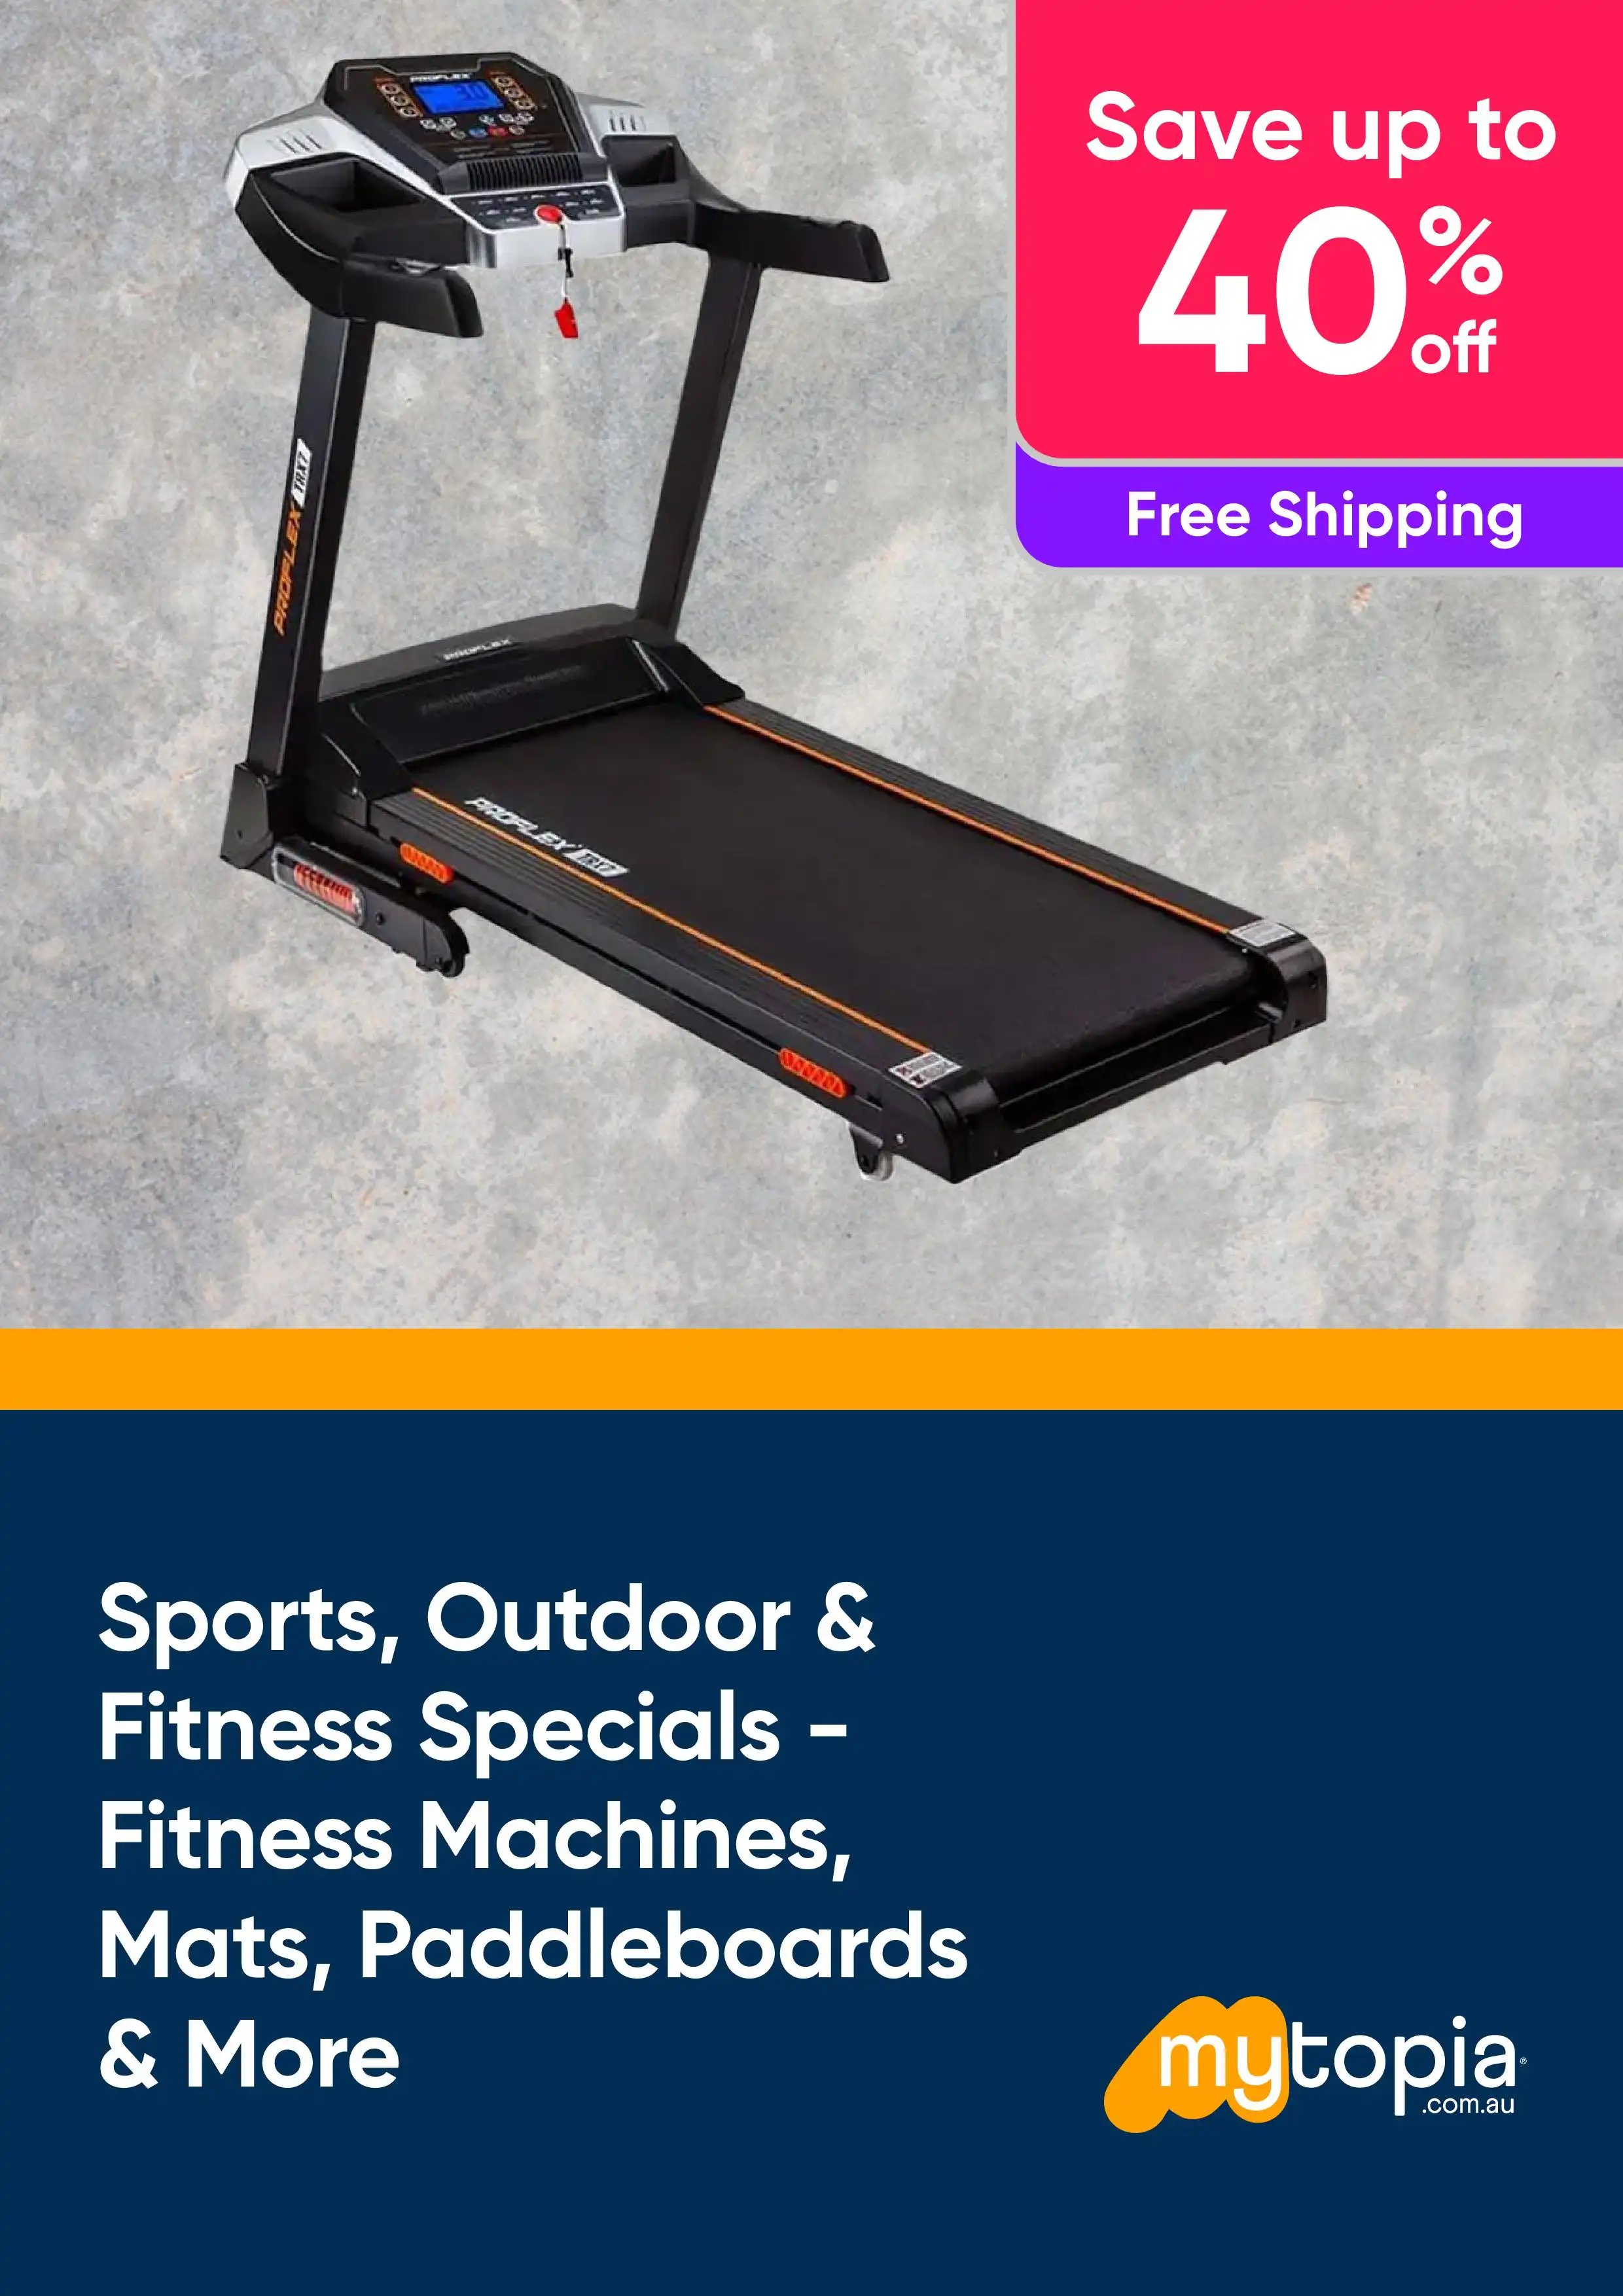 Sports, Outdoor and Fitness Specials - Exercise Equipment, Fitness Machines, Mats, Paddleboards and More - Save Up to 40% Off